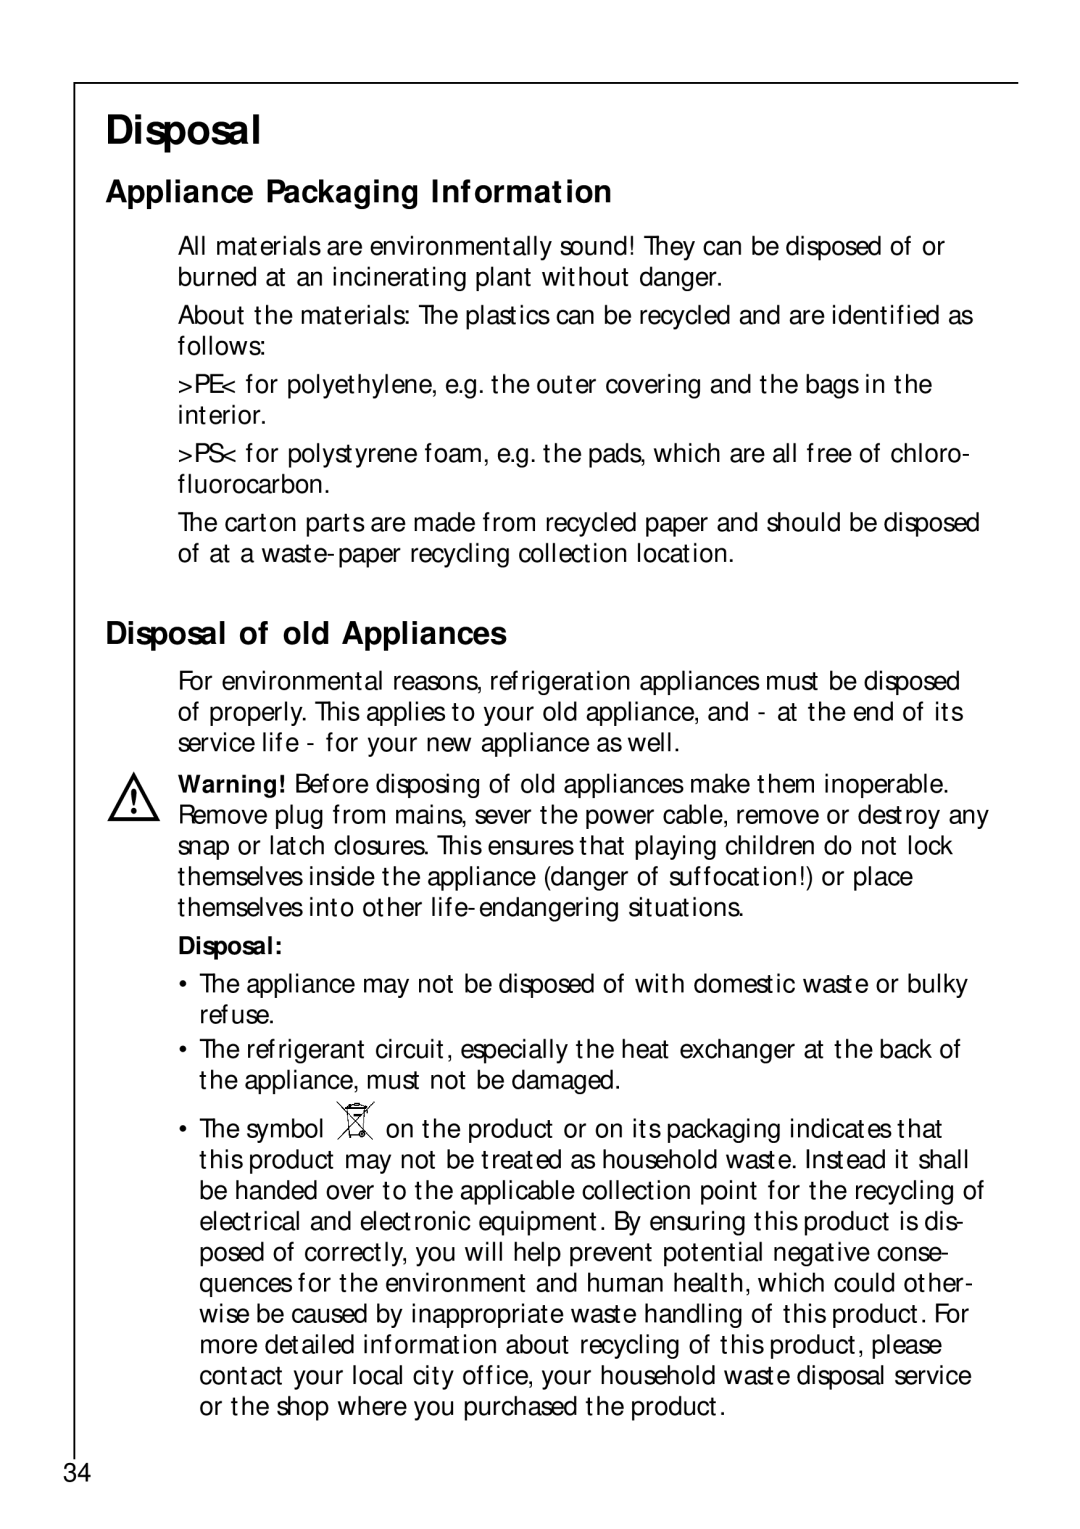 Electrolux Z 9 18 42-4 I user manual Appliance Packaging Information, Disposal of old Appliances 